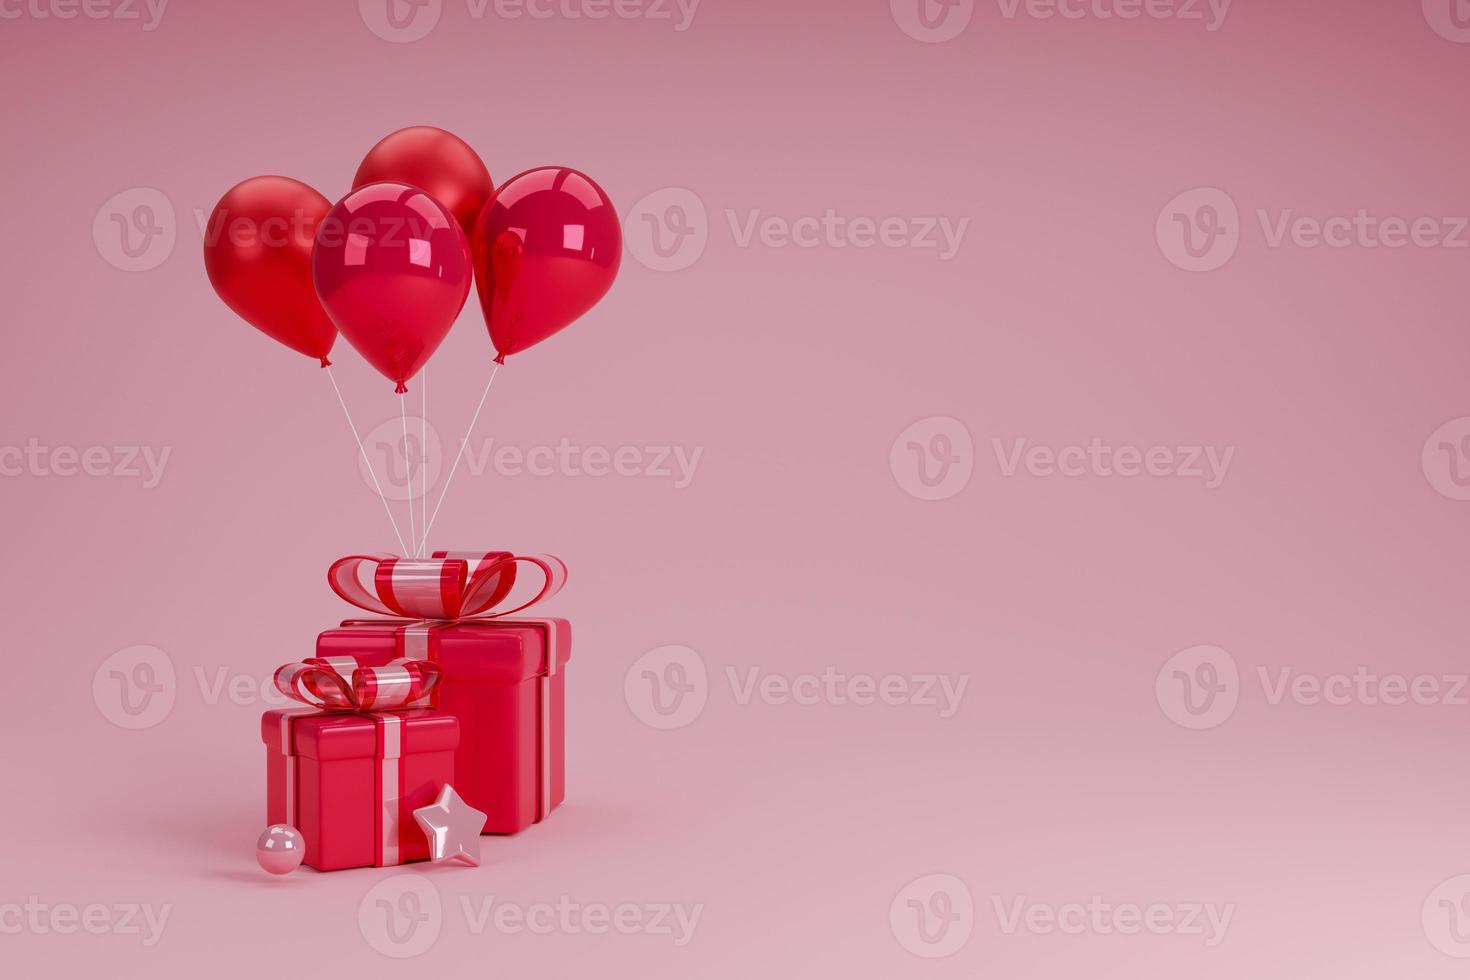 mock up ballon with giftbox,helium balloons,gift box.Realistic decorative design elements.pink,coral color.Poster,banner happy anniversary.Christmas,Valentie,Festive background.3D render illustration. photo